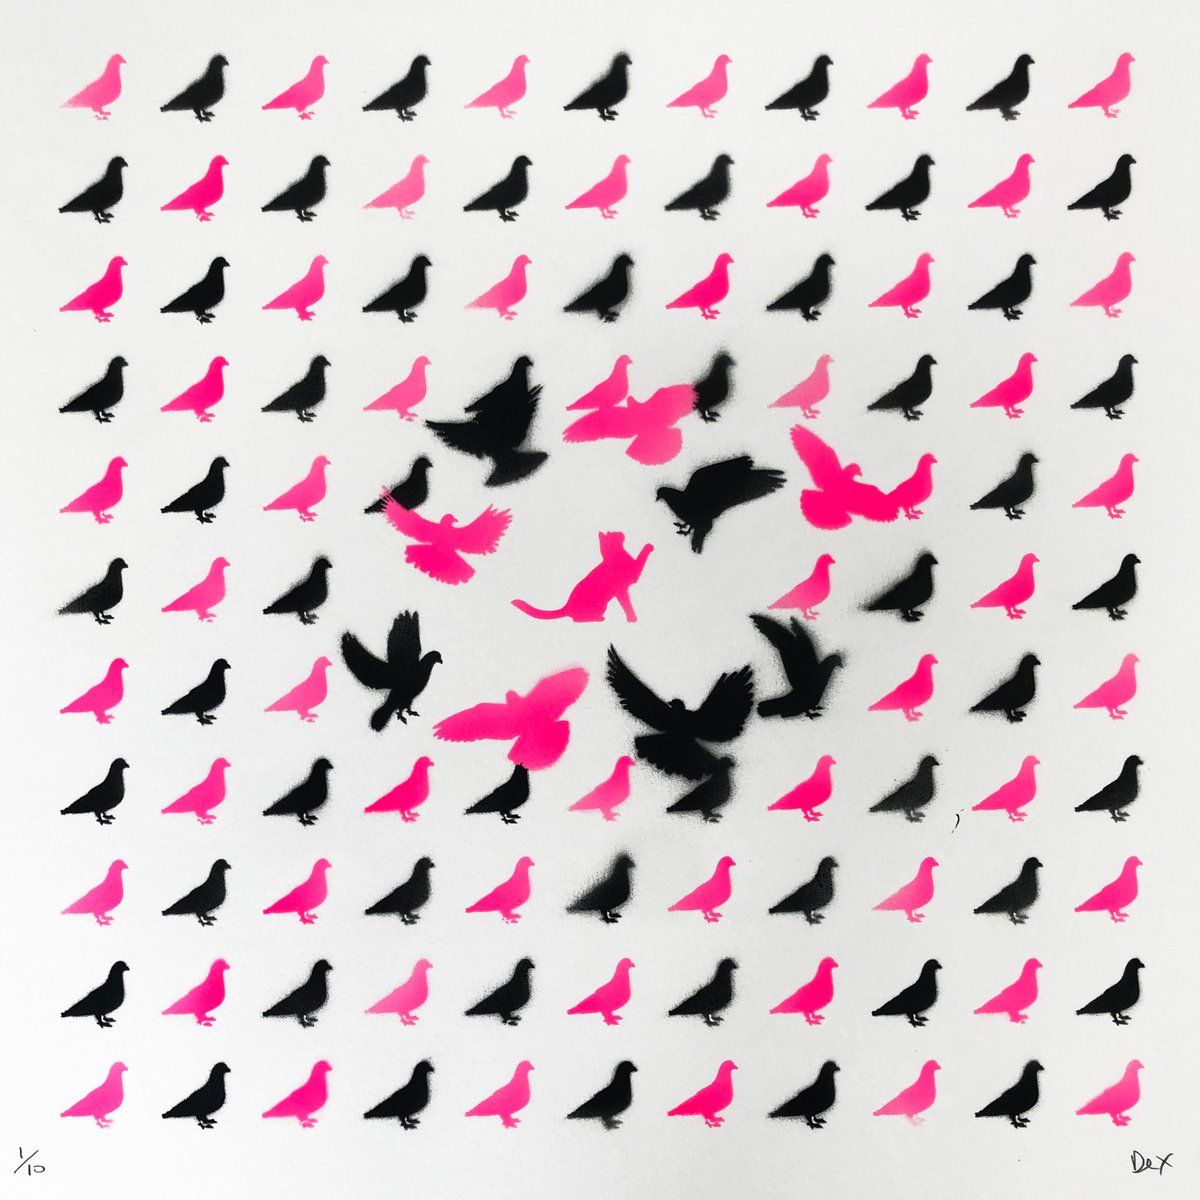 Amongst The Pigeons (Pink stencil) by Dex